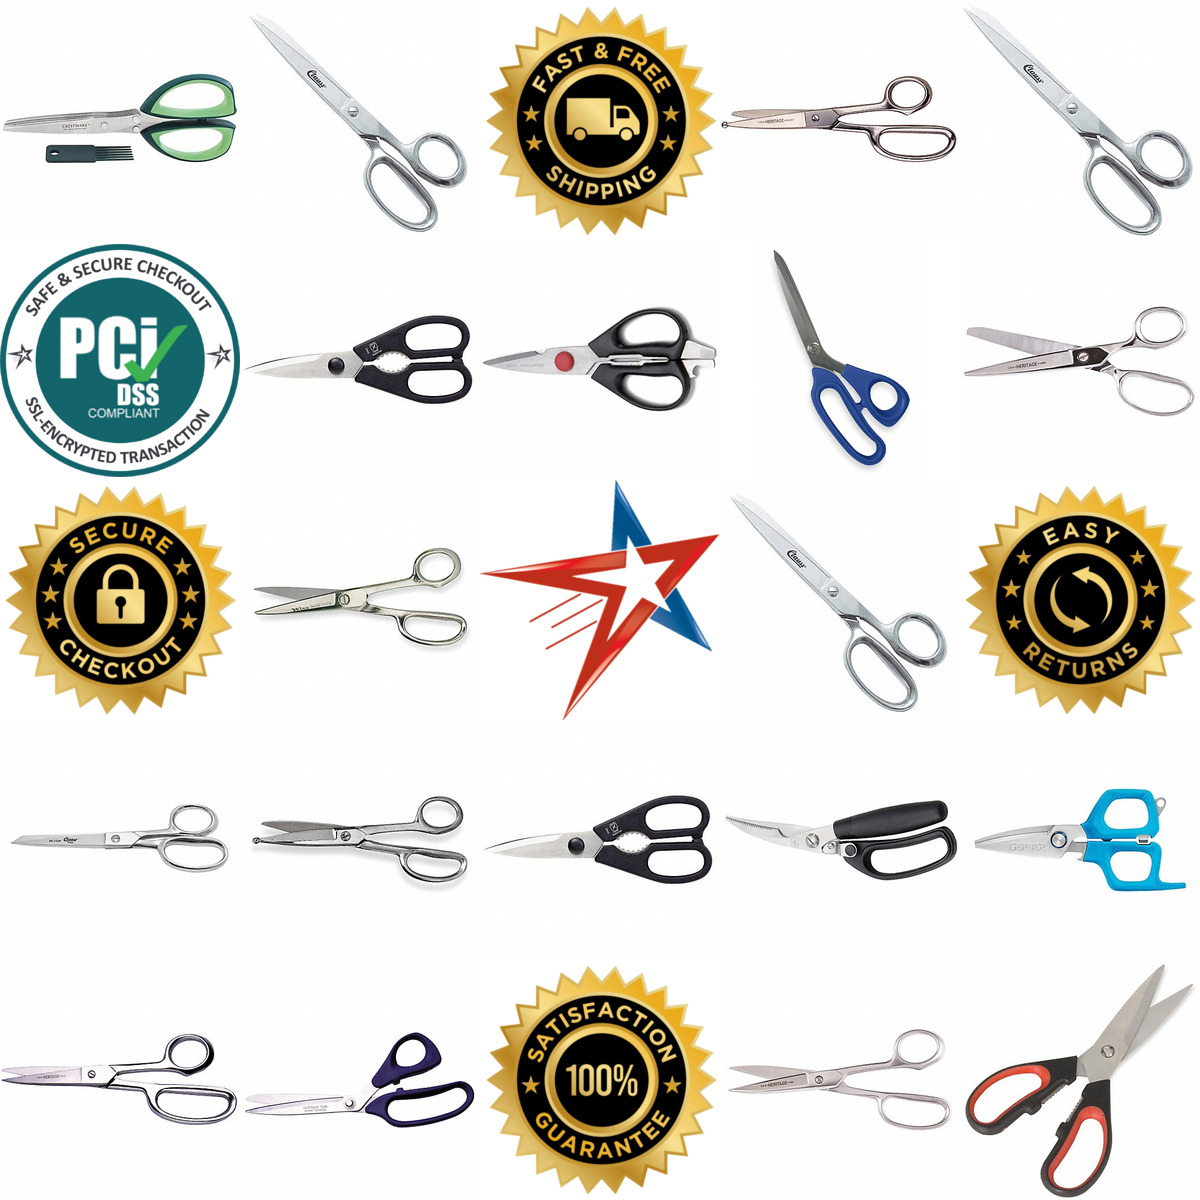 A selection of Food Processing Shears and Trimmers products on GoVets